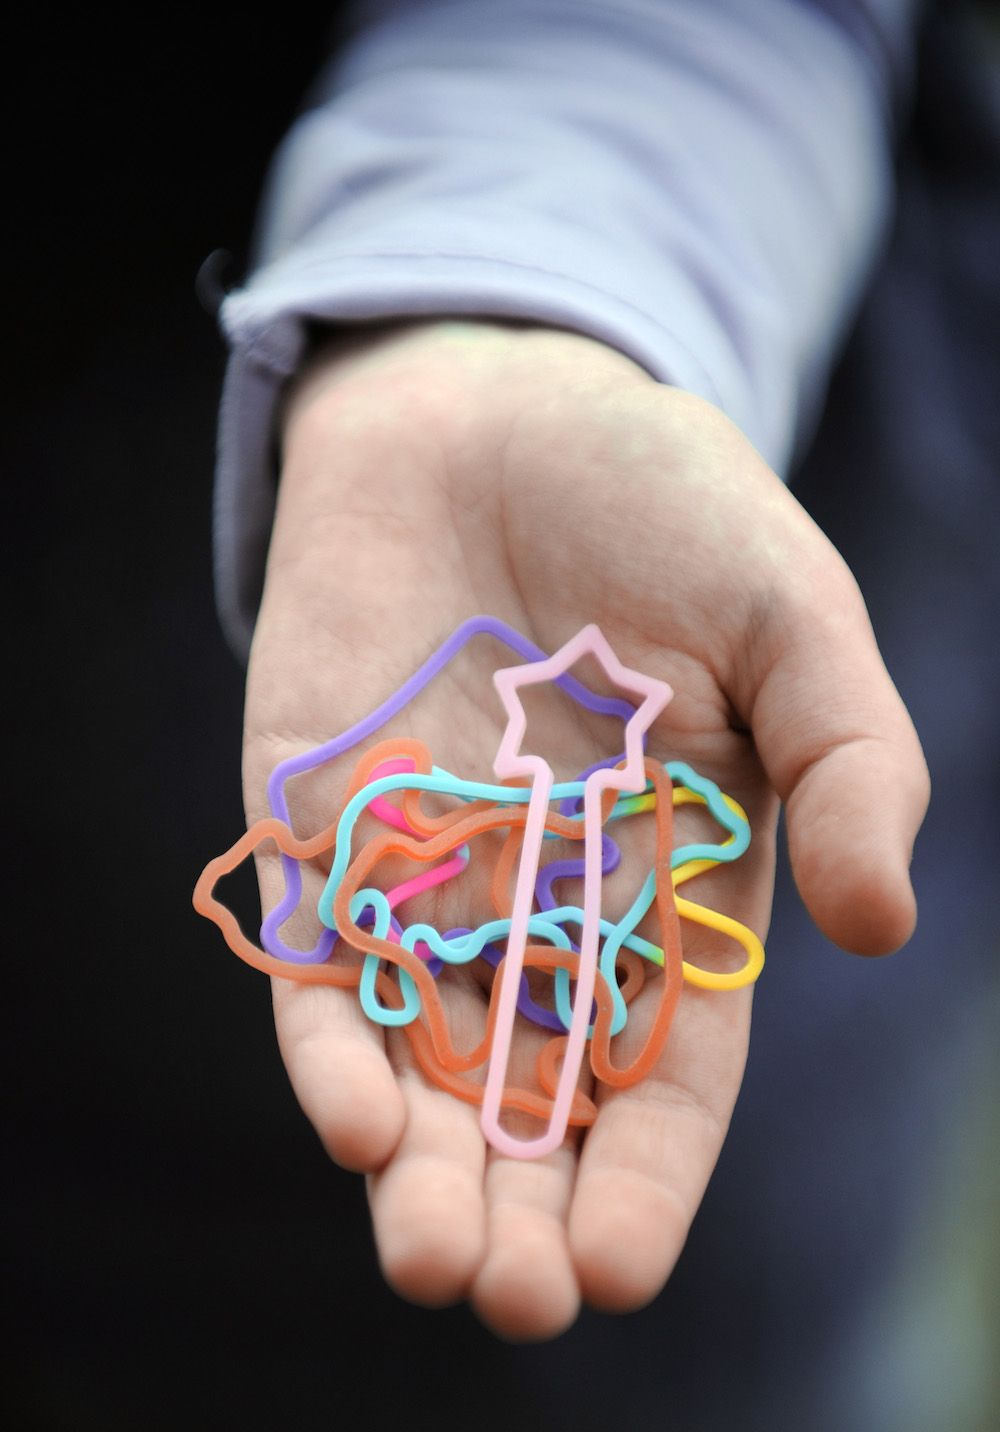 Silly Bandz: The hottest thing in class